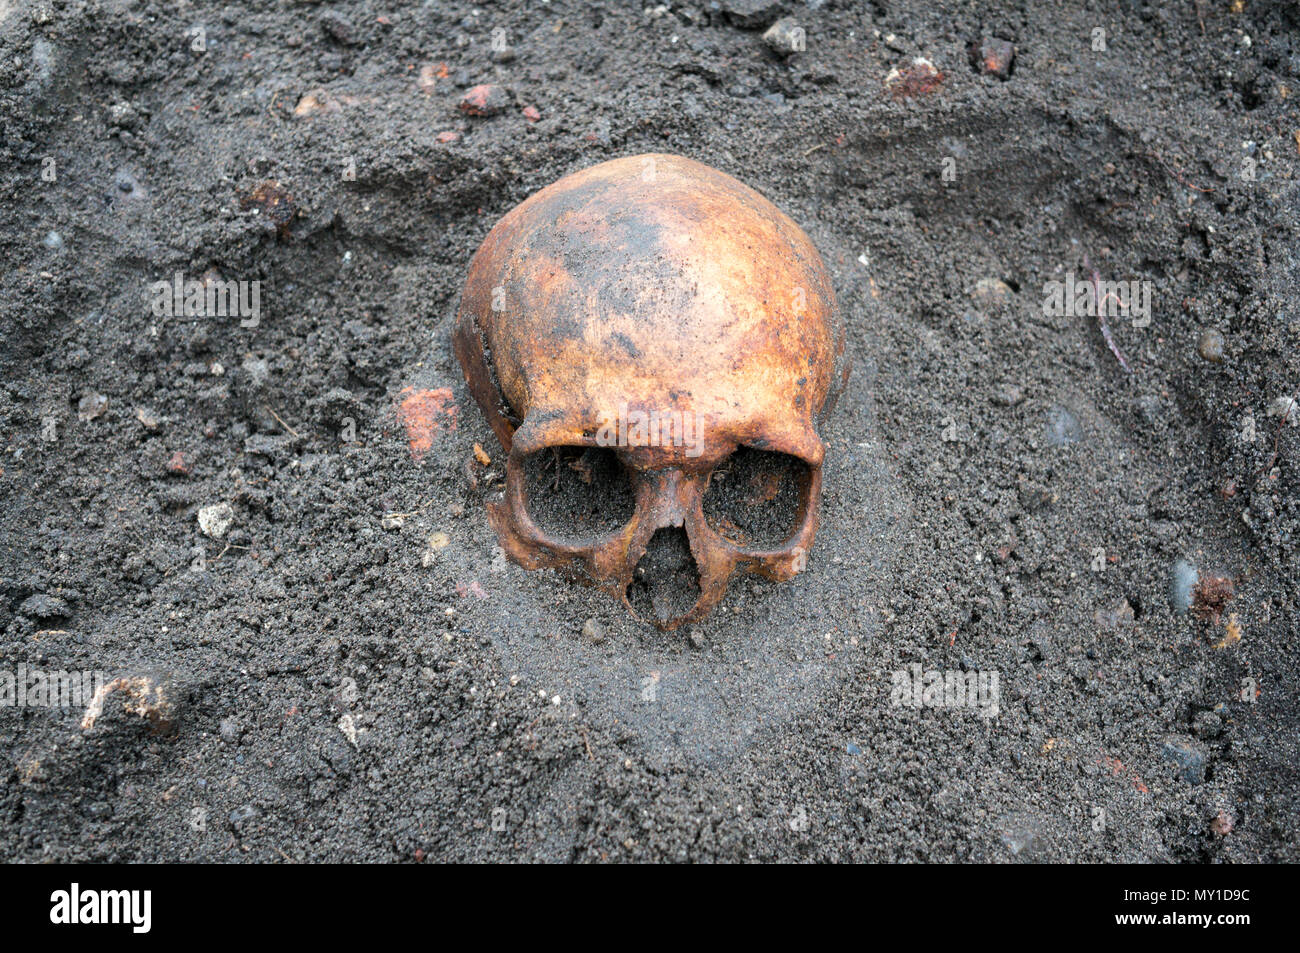 Archaeological excavation with old antique skull still half buried in the ground. Stock Photo